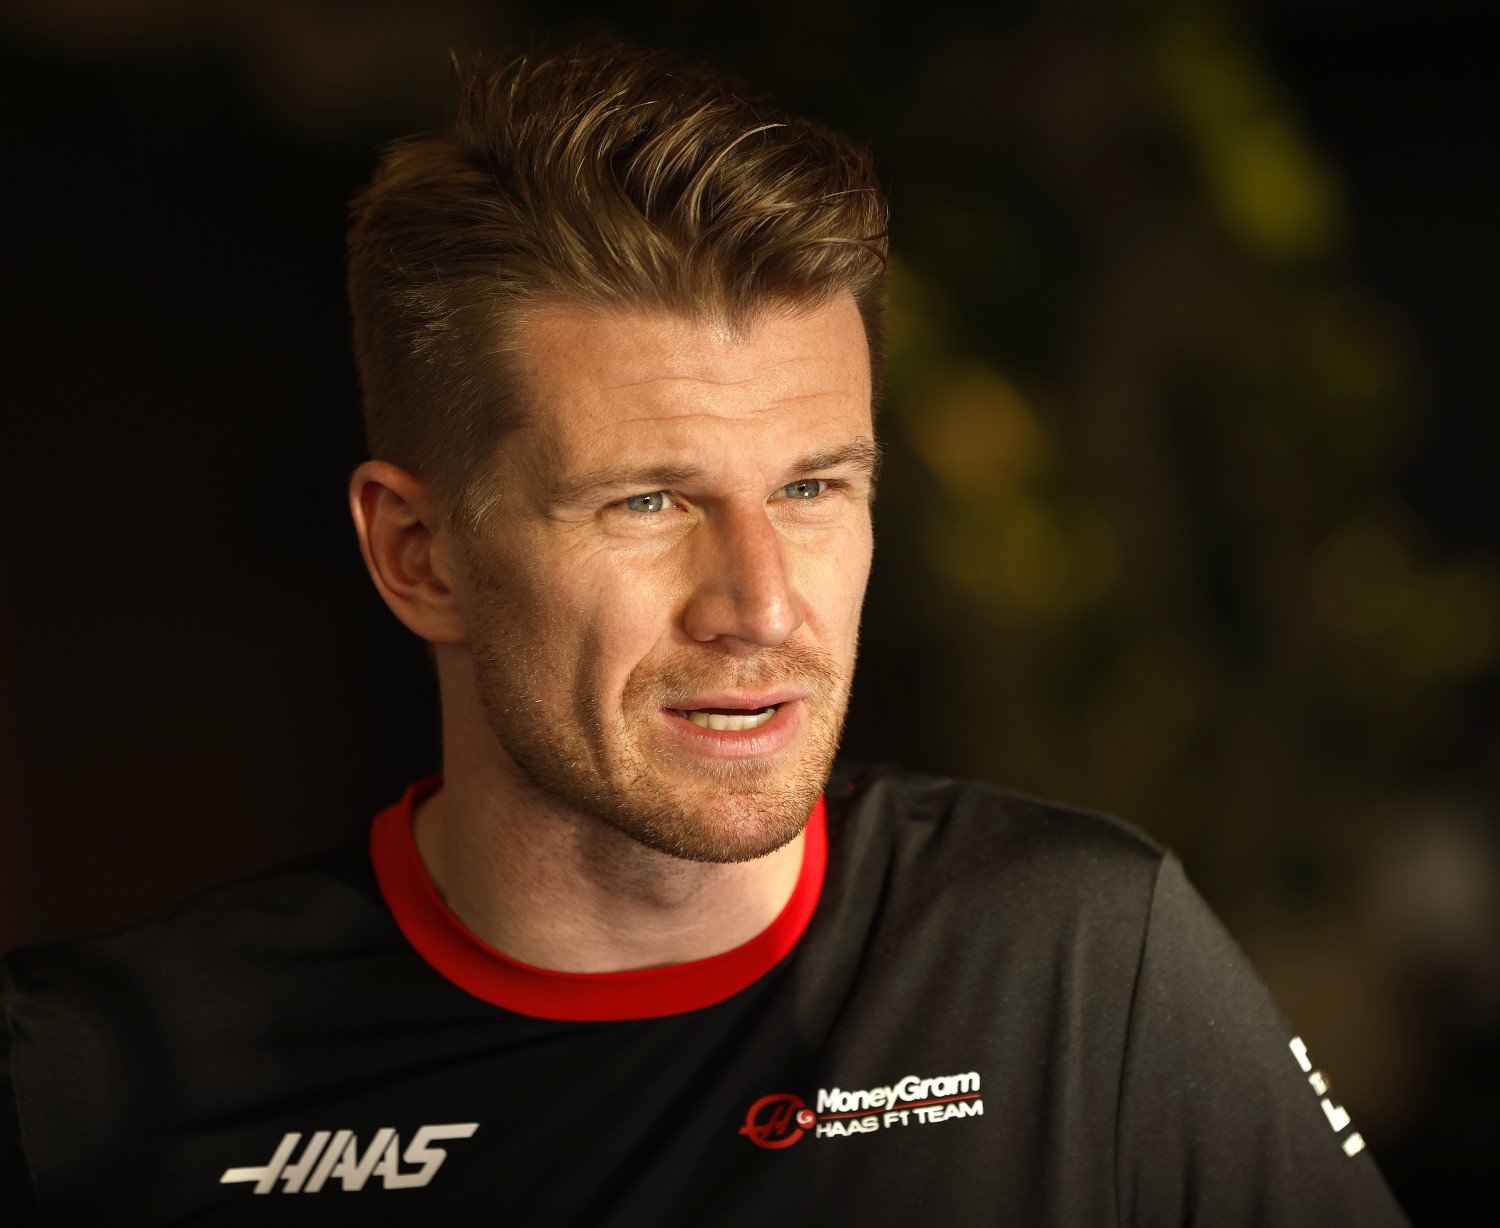 Nico Hulkenberg, Haas F1 Team during the Saudi Arabian GP at Jeddah Street Circuit on Thursday March 16, 2023 in Jeddah, Saudi Arabia. (Photo by Zak Mauger / LAT Images)